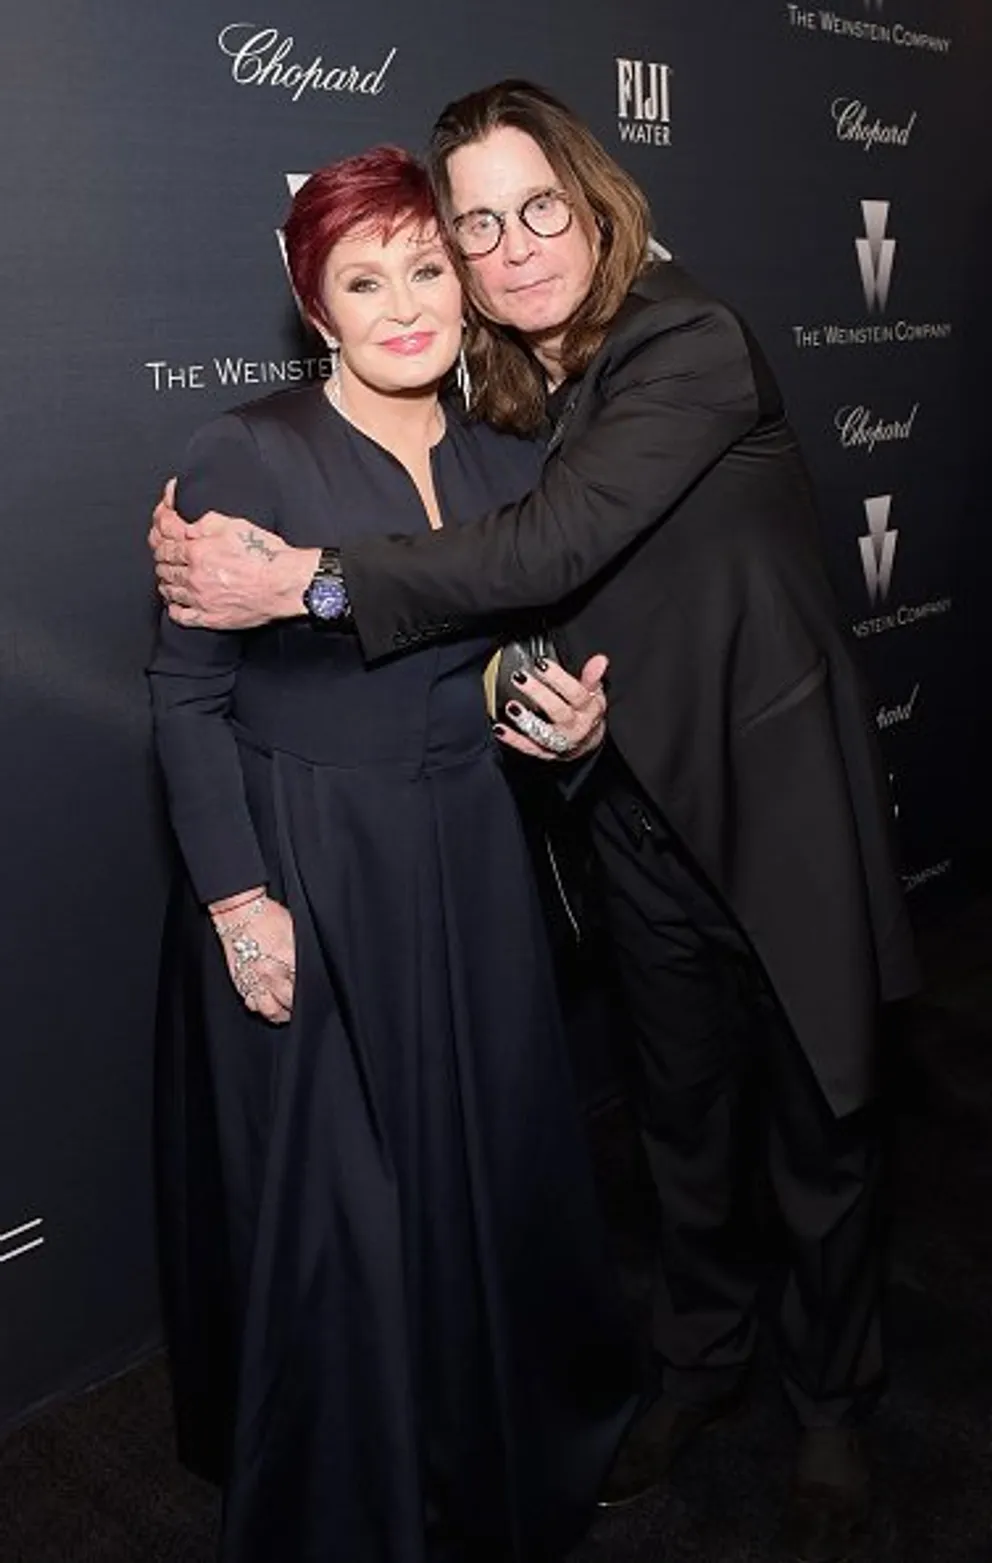 Sharon Osbourne and Ozzy Osbourne at The Weinstein Company's Academy Awards Nominees Dinner in partnership with Chopard, DeLeon Tequila, FIJI Water and MAC Cosmetics on February 21, 2015 in Los Angeles, California | Photo: Getty Images